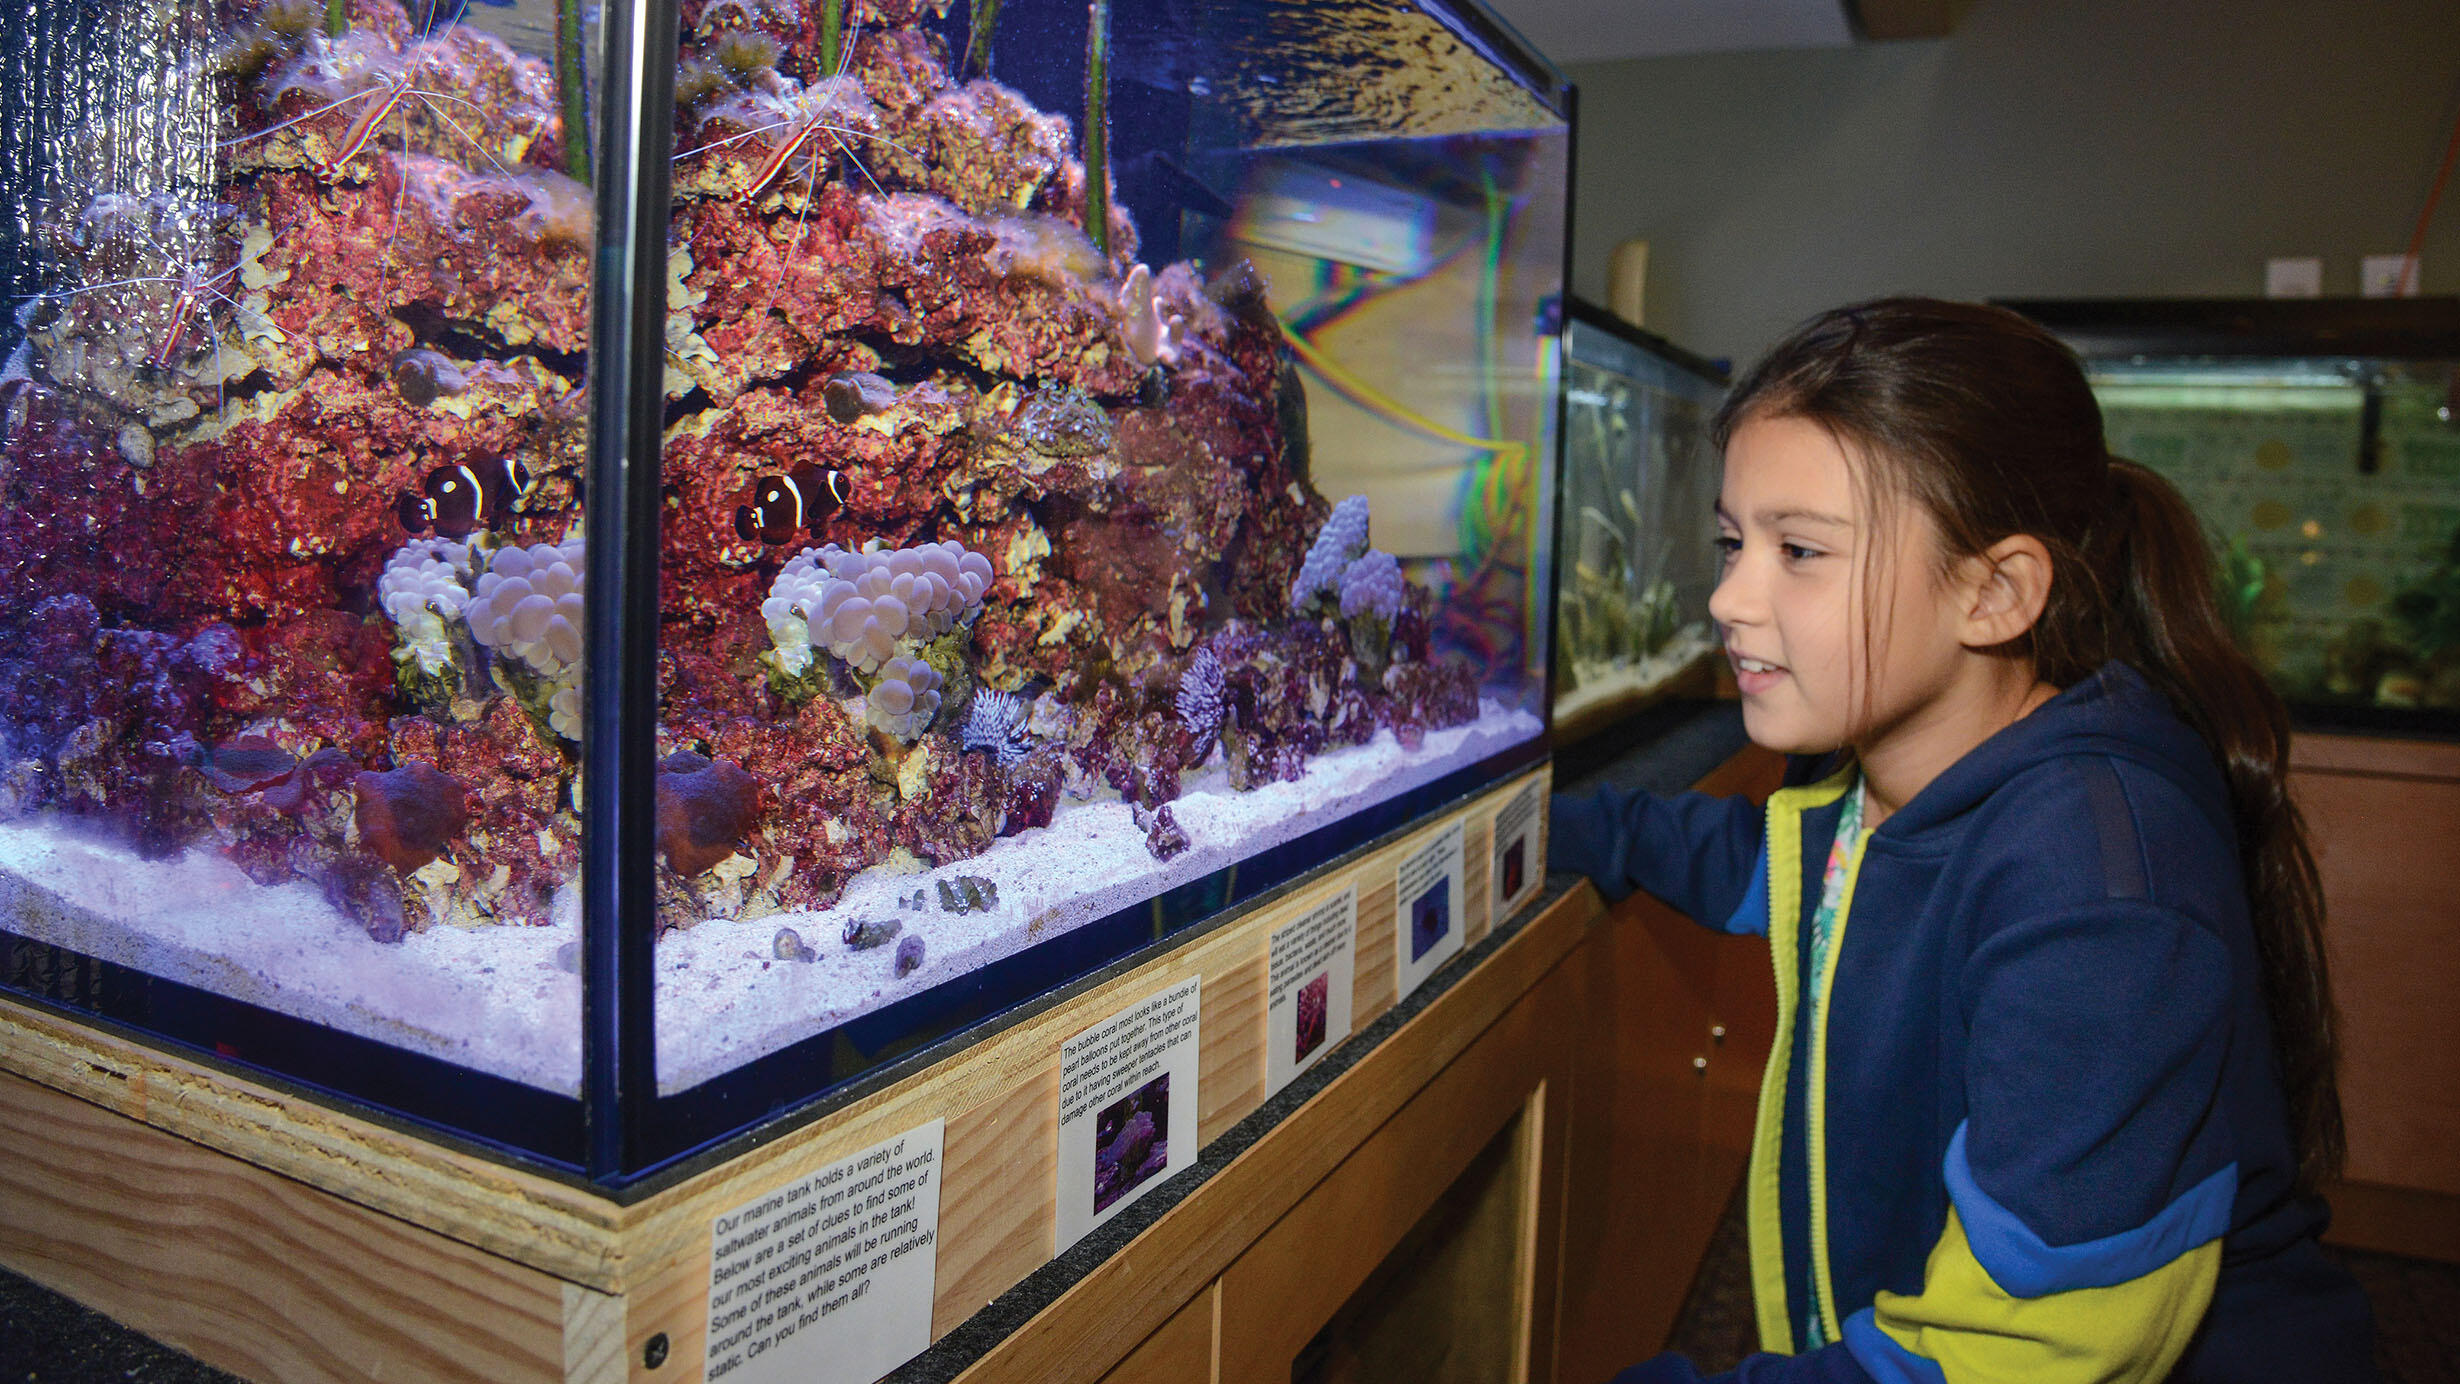 A girl observes a tropical coral reef exhibit inside a tank. 